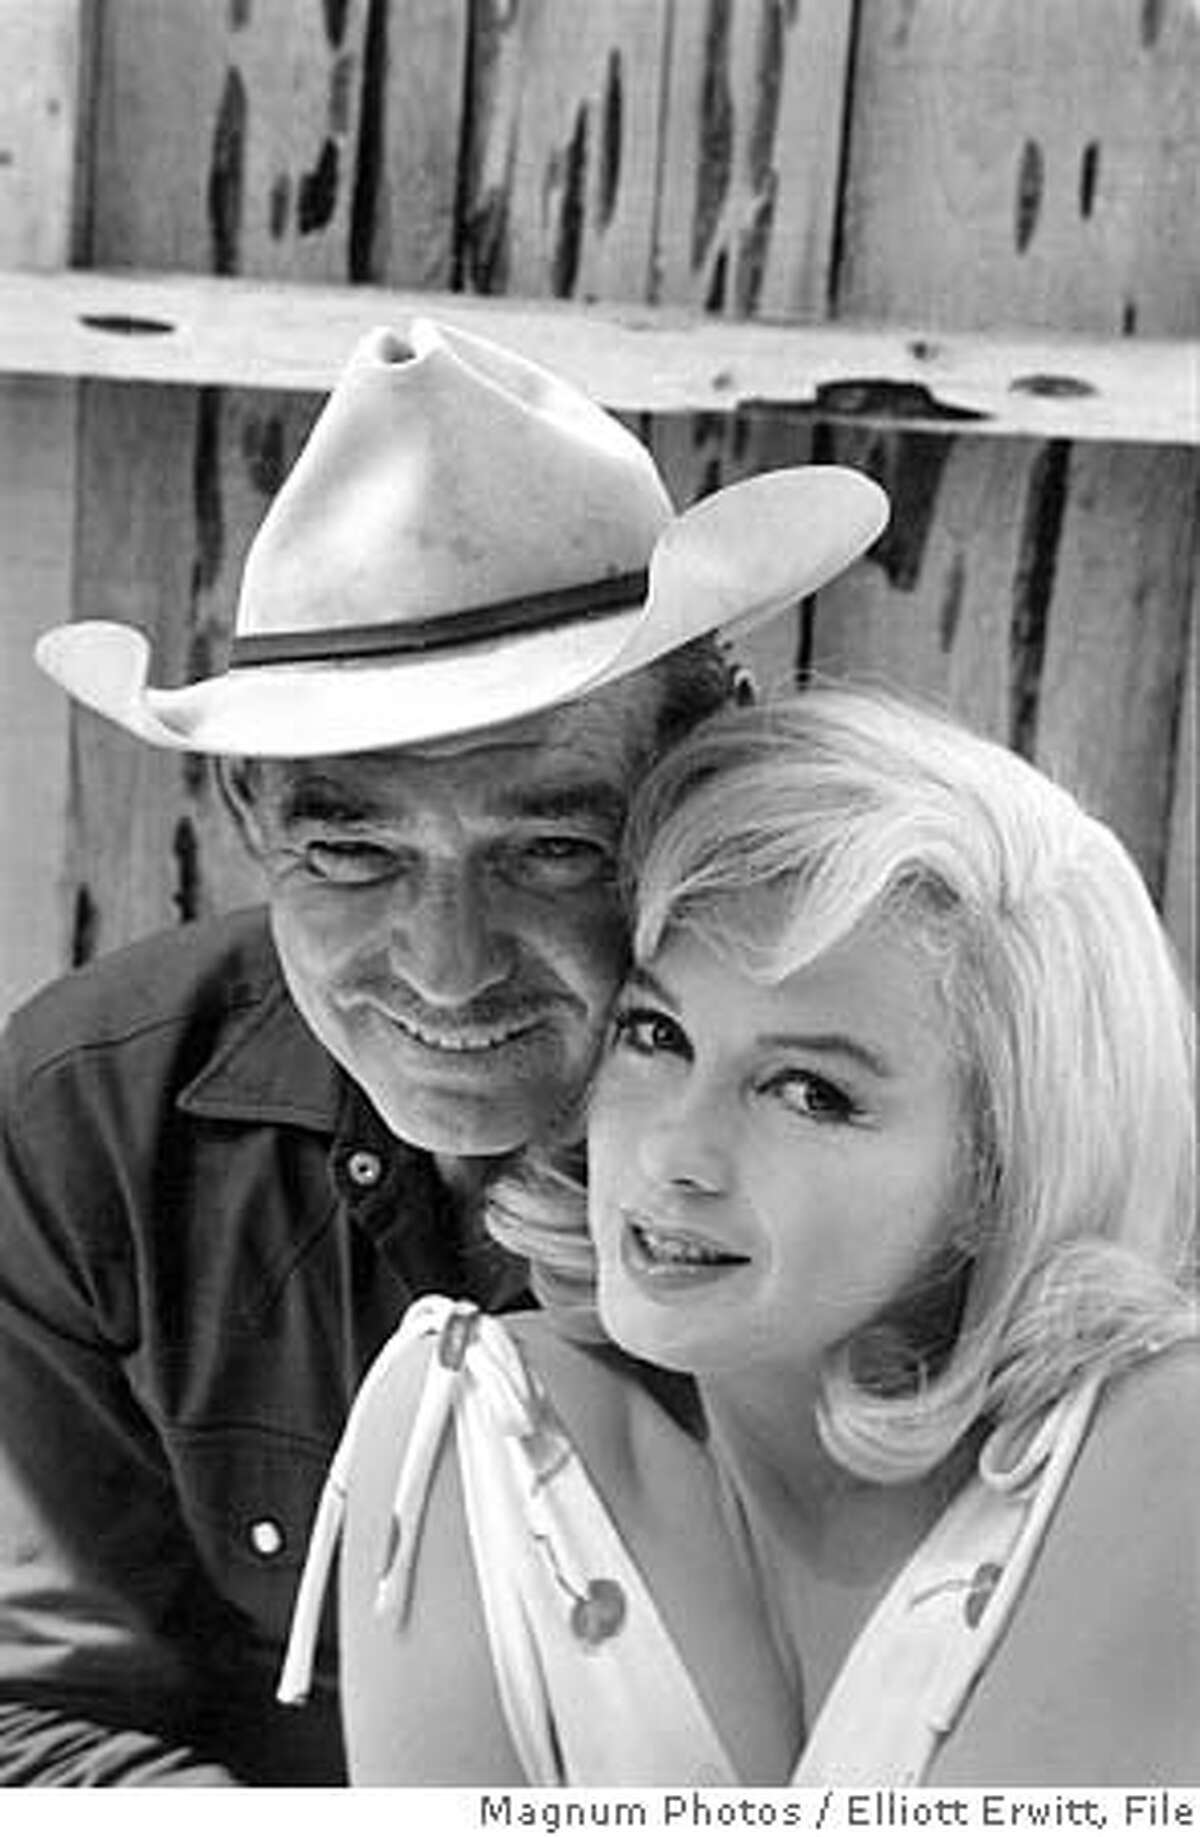 THIS IS A HANDOUT IMAGE. PLEASE VERIFY RIGHTS. MISFITS30-B-27SEP02-DD-HO The fabled film was the final work of two Hollywood icons, Clark Gable and Marilyn Monroe (pictured), directed by John Huston. Making "The Misfits" @ Photographer: Elliott Erwitt / Magnum Photos